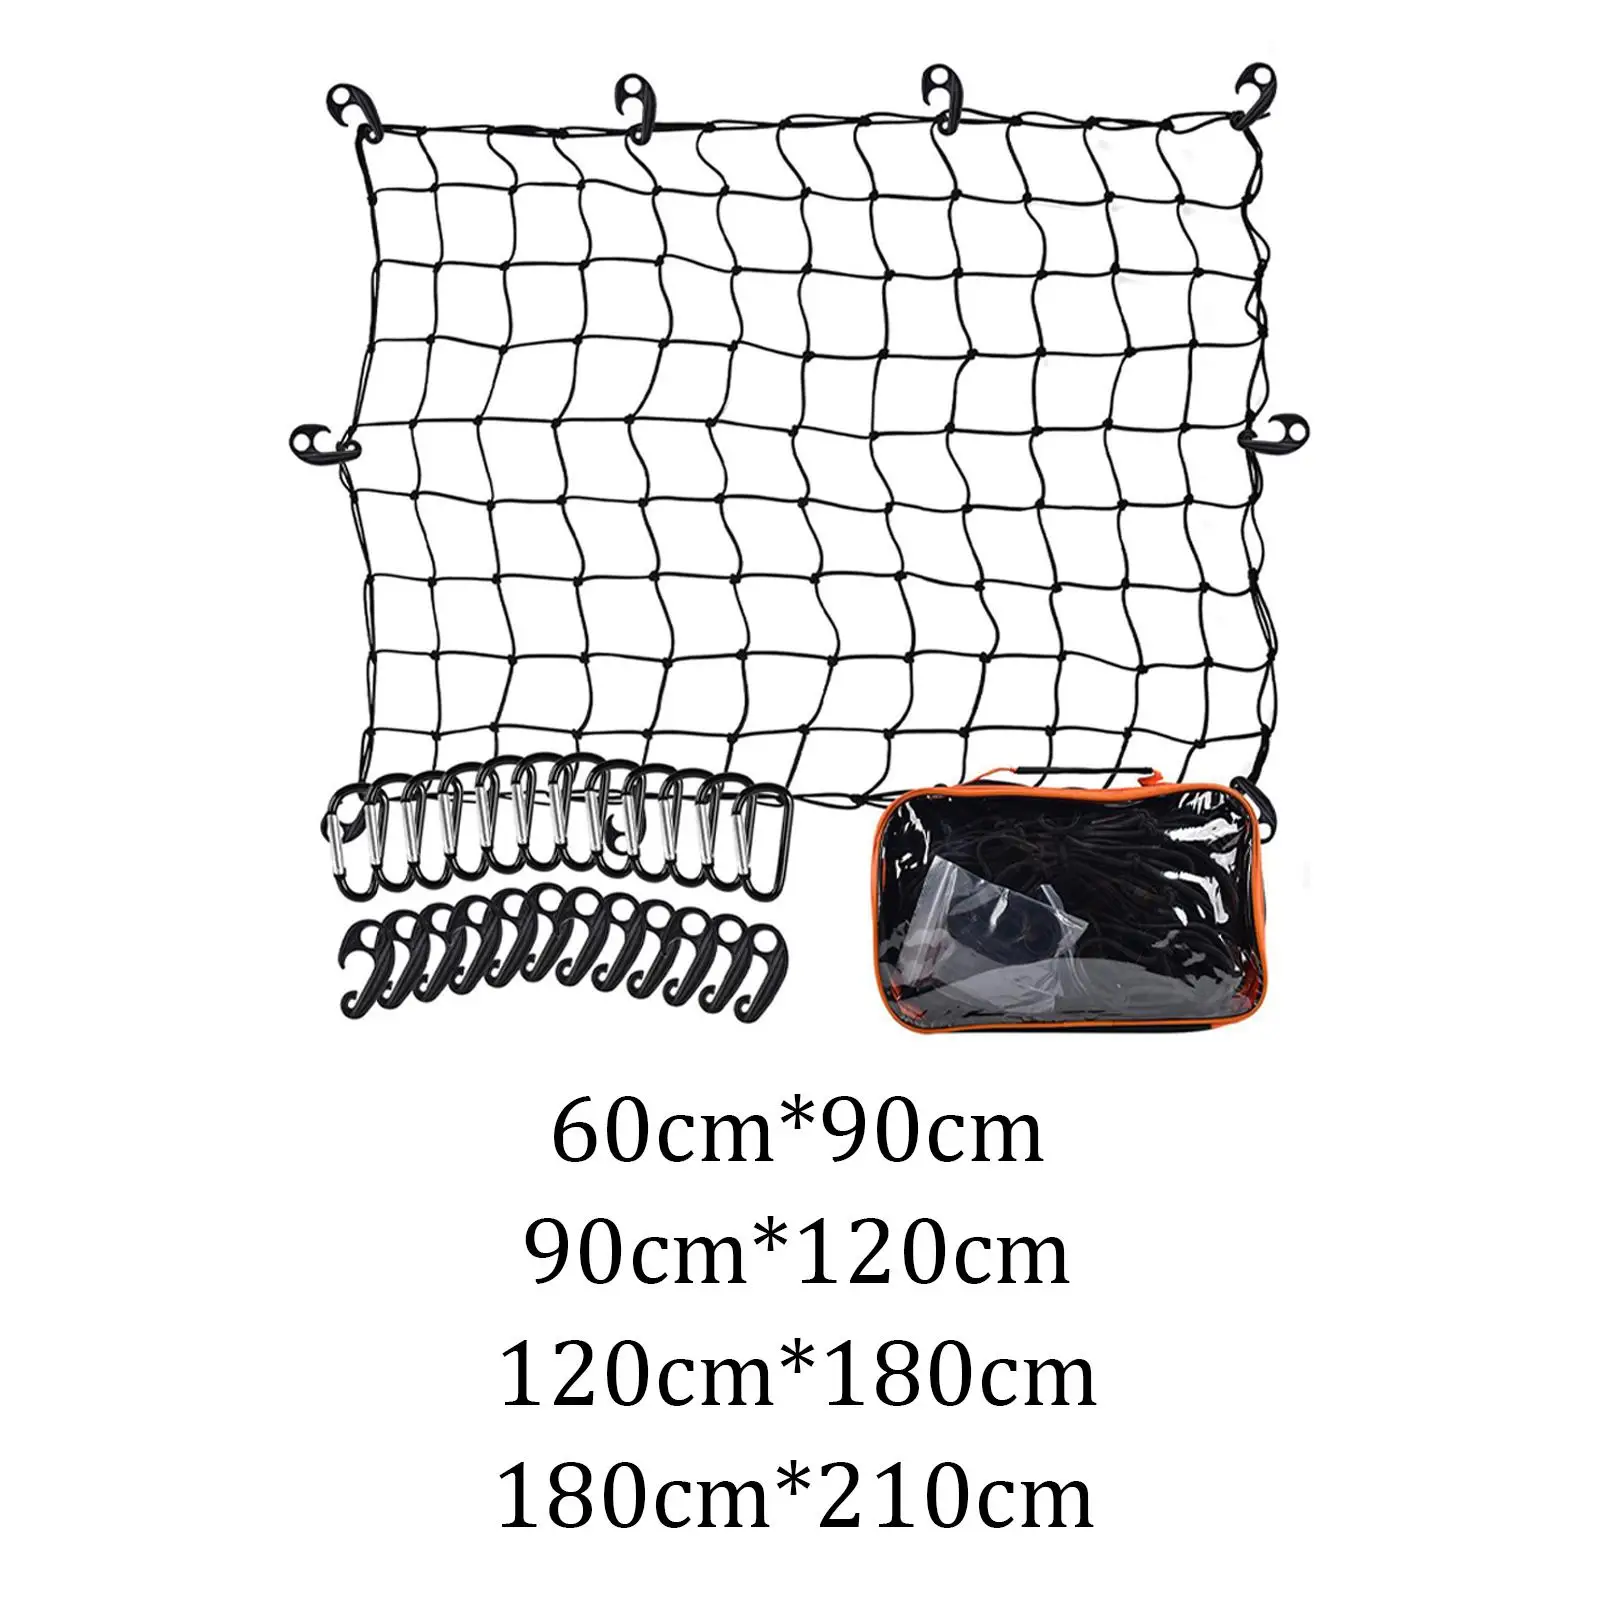 

Automotive Cargo Net Car Cargo Net Easy to Install Heavy Duty Elastic Luggage Net for RV Roof Rack Cars Pickup Truck Bed